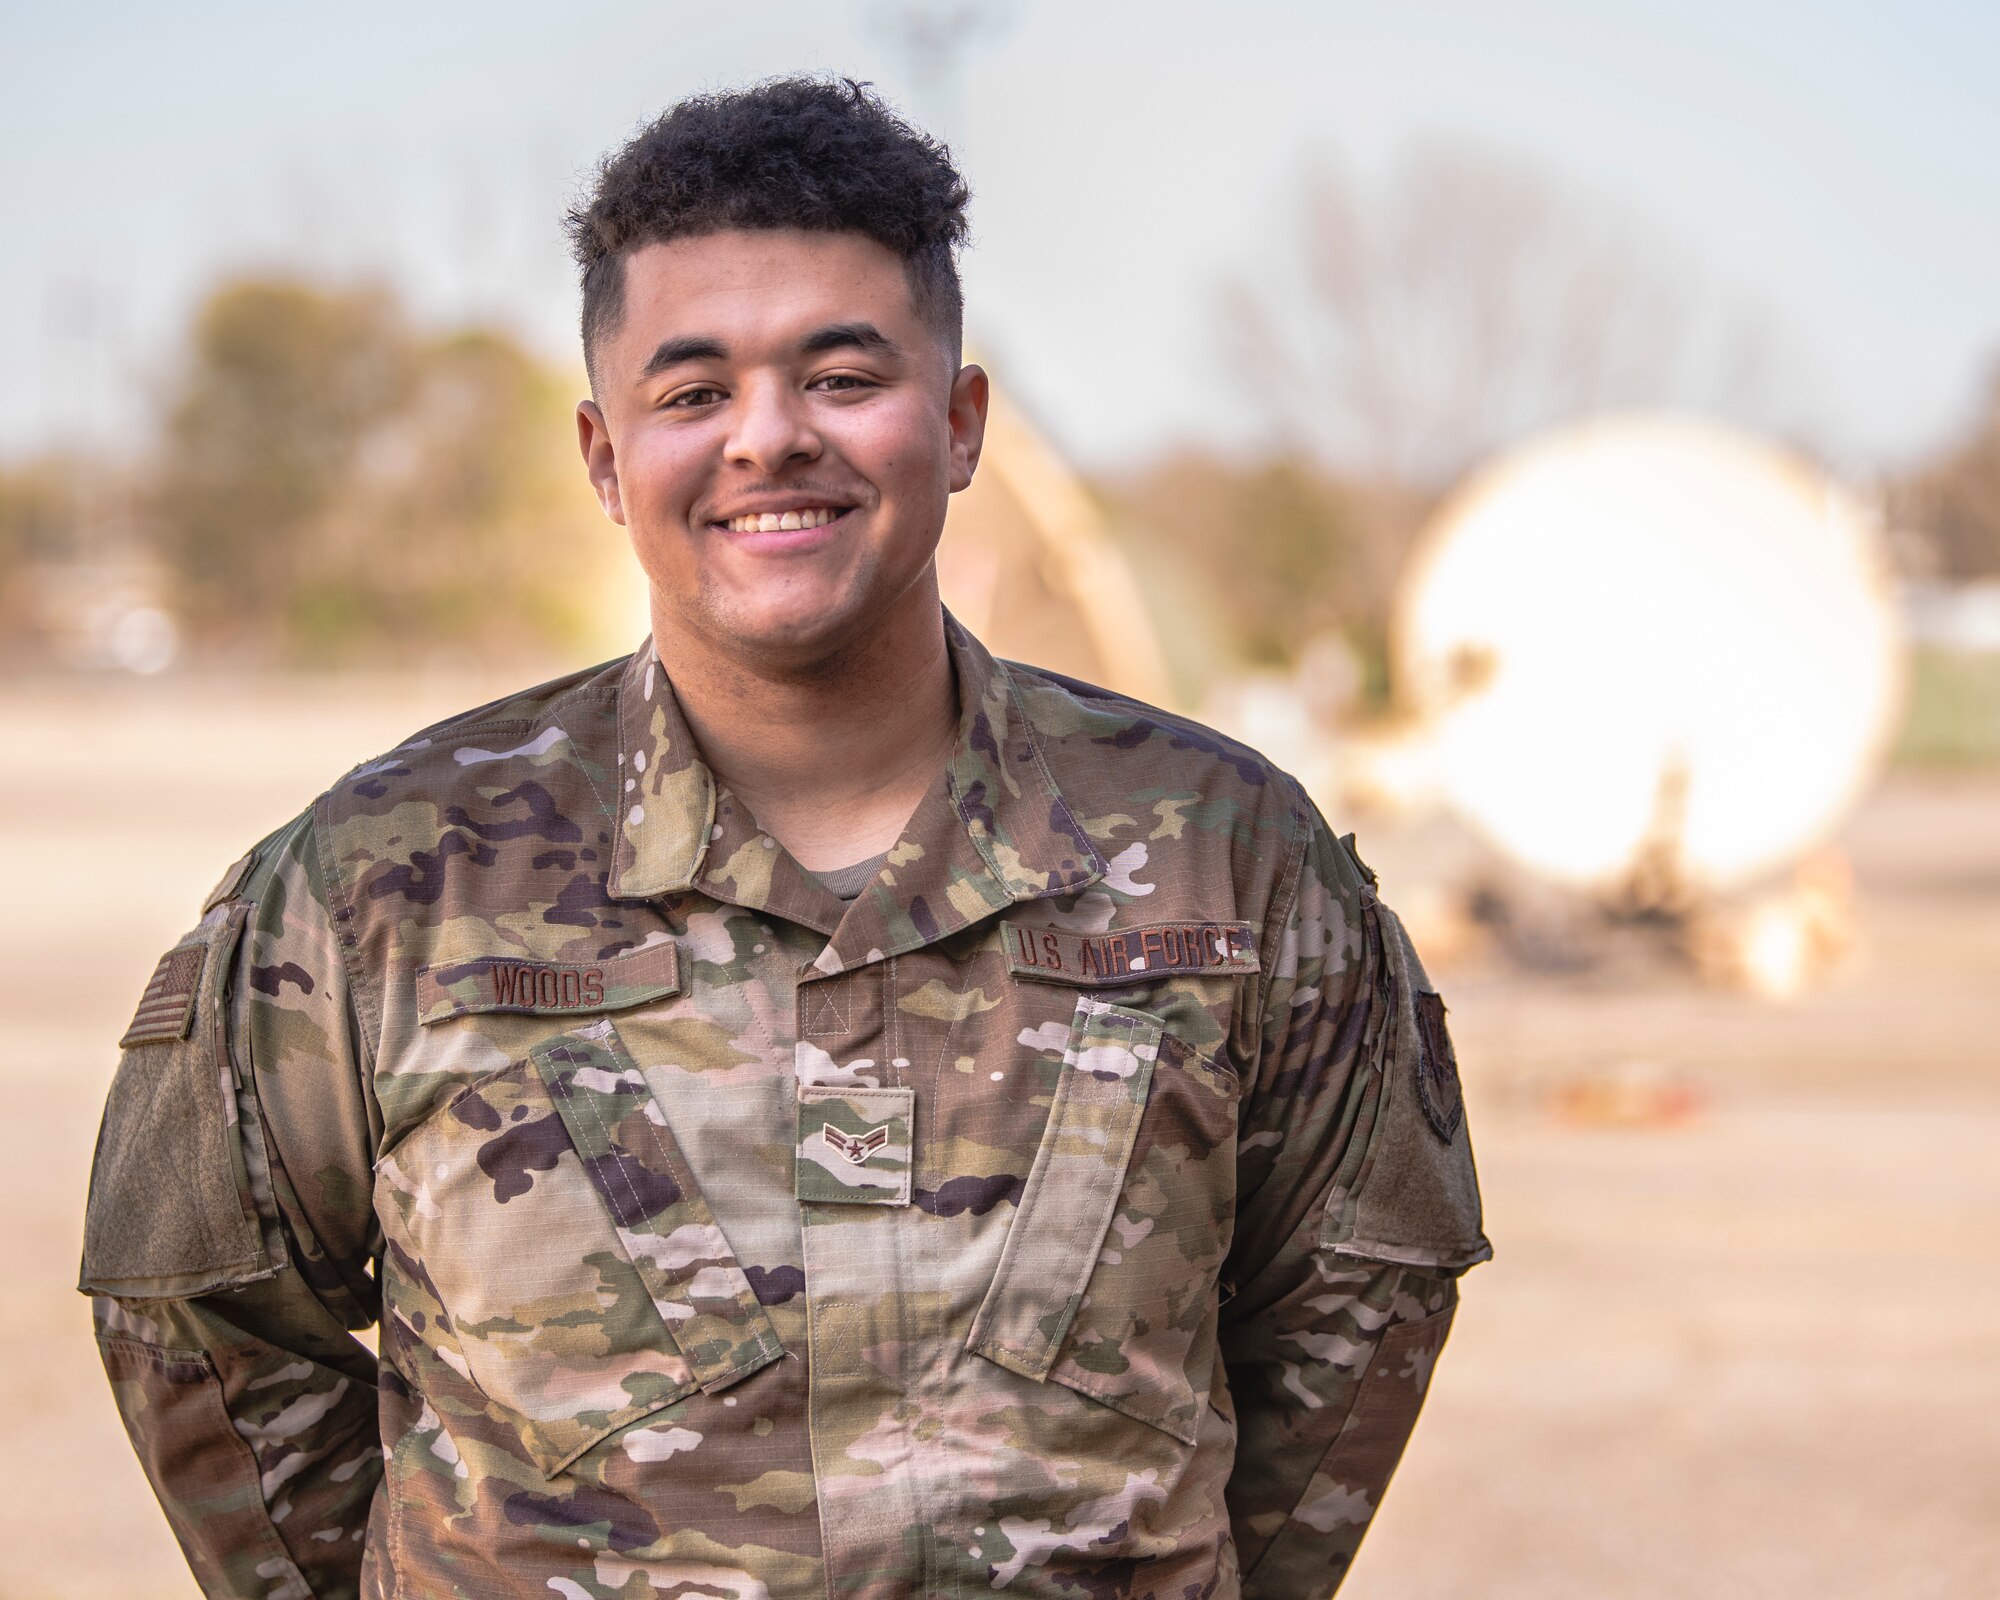 A1C Preston Woods, an RF Transmissions technician with the 232nd Combat Communications Squadron, stands outside his unit March 6, 2021, at the 232nd CCS in Montgomery, Ala. The 232nd CCS is a geographically separated unit attached to the 187th Fighter Wing at Dannelly Field, Ala. (U.S. Air National Guard photo by Staff Sgt. Hayden Johnson)